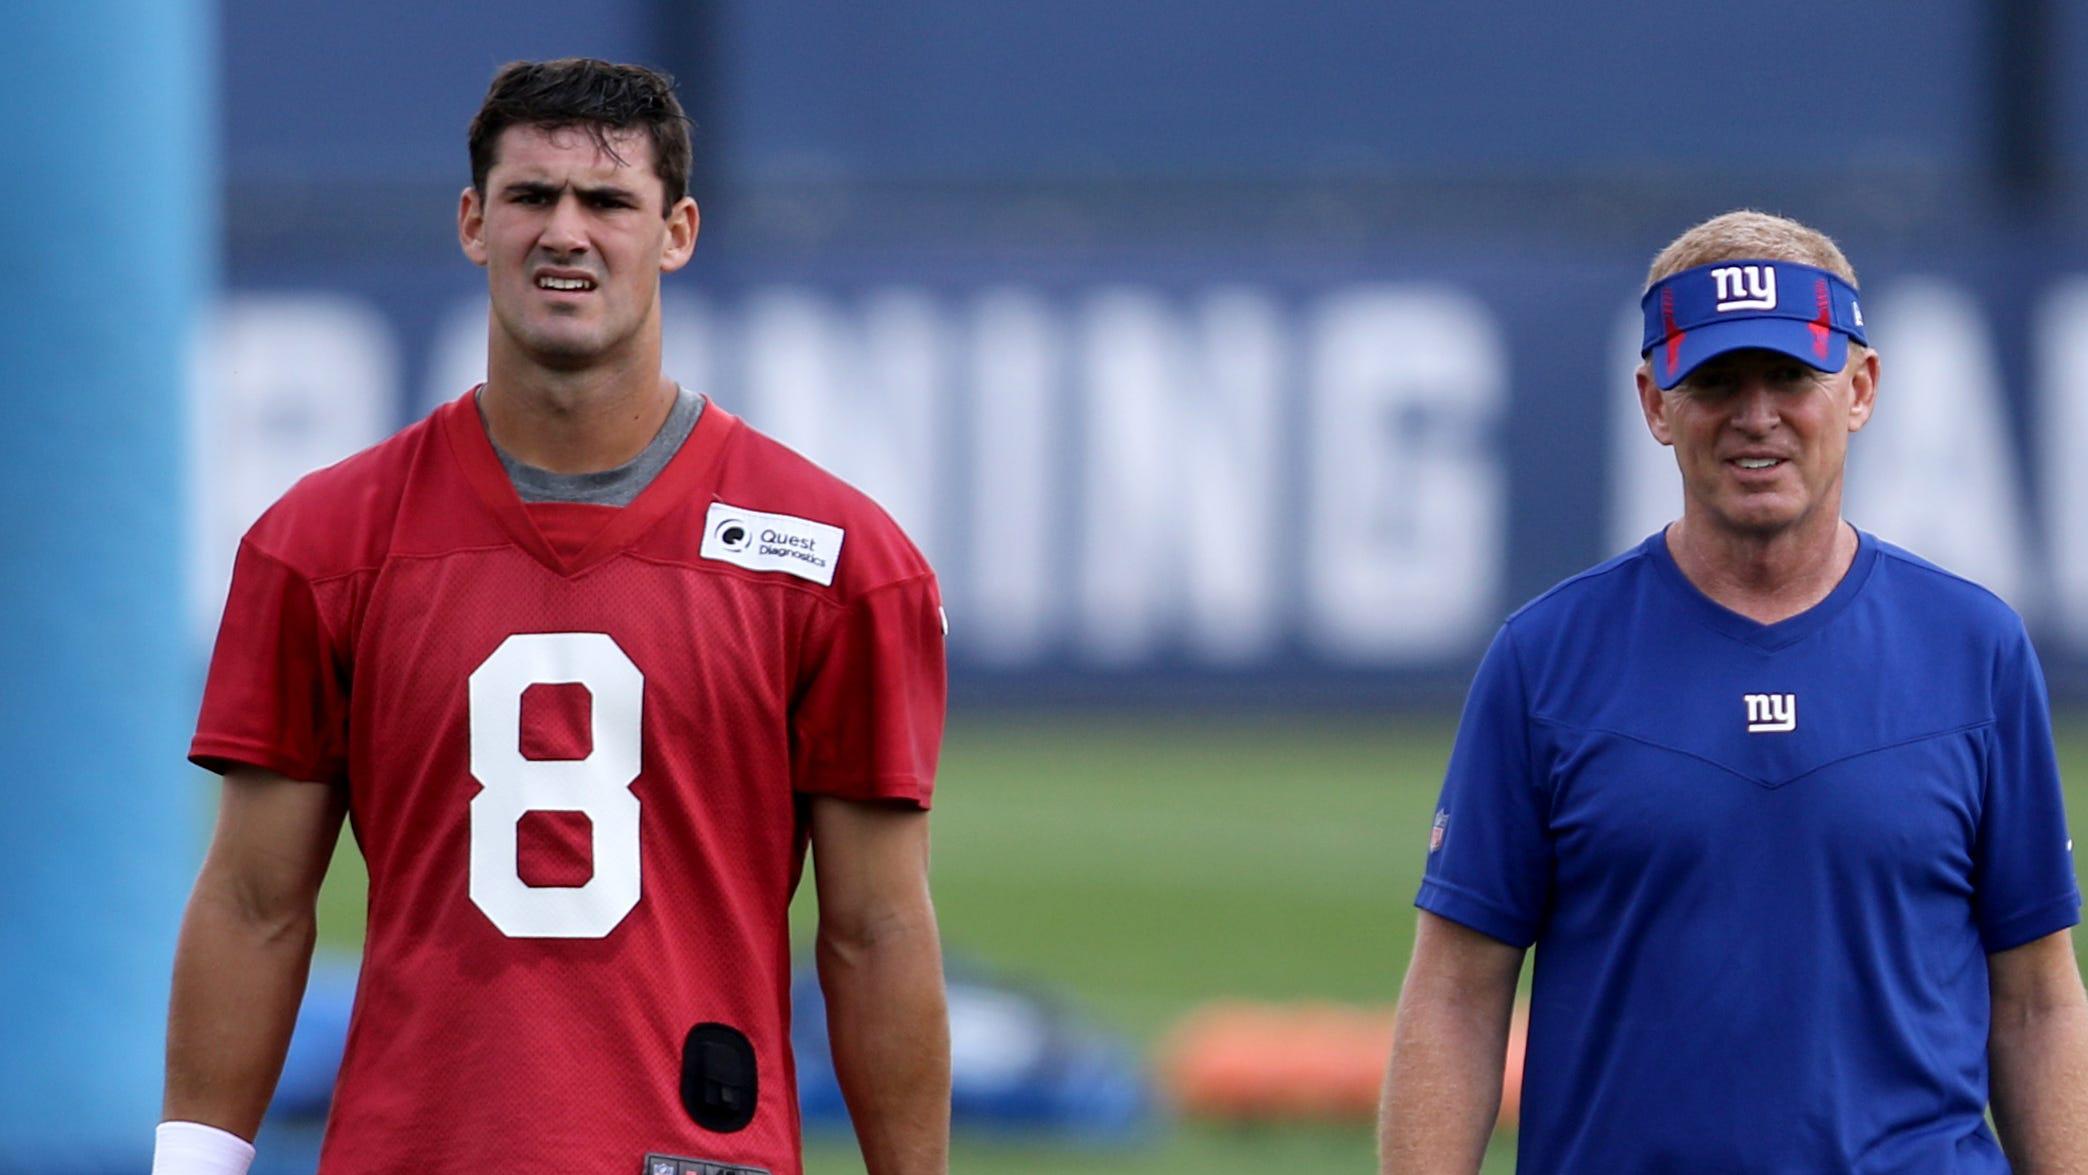 Quarterback Daniel Jones and Offensive Coordinator, Jason Garrett walk off the field after Giants practice, in East Rutherford. / Kevin R. Wexler-NorthJersey.com-Imagn Content Services, LLC